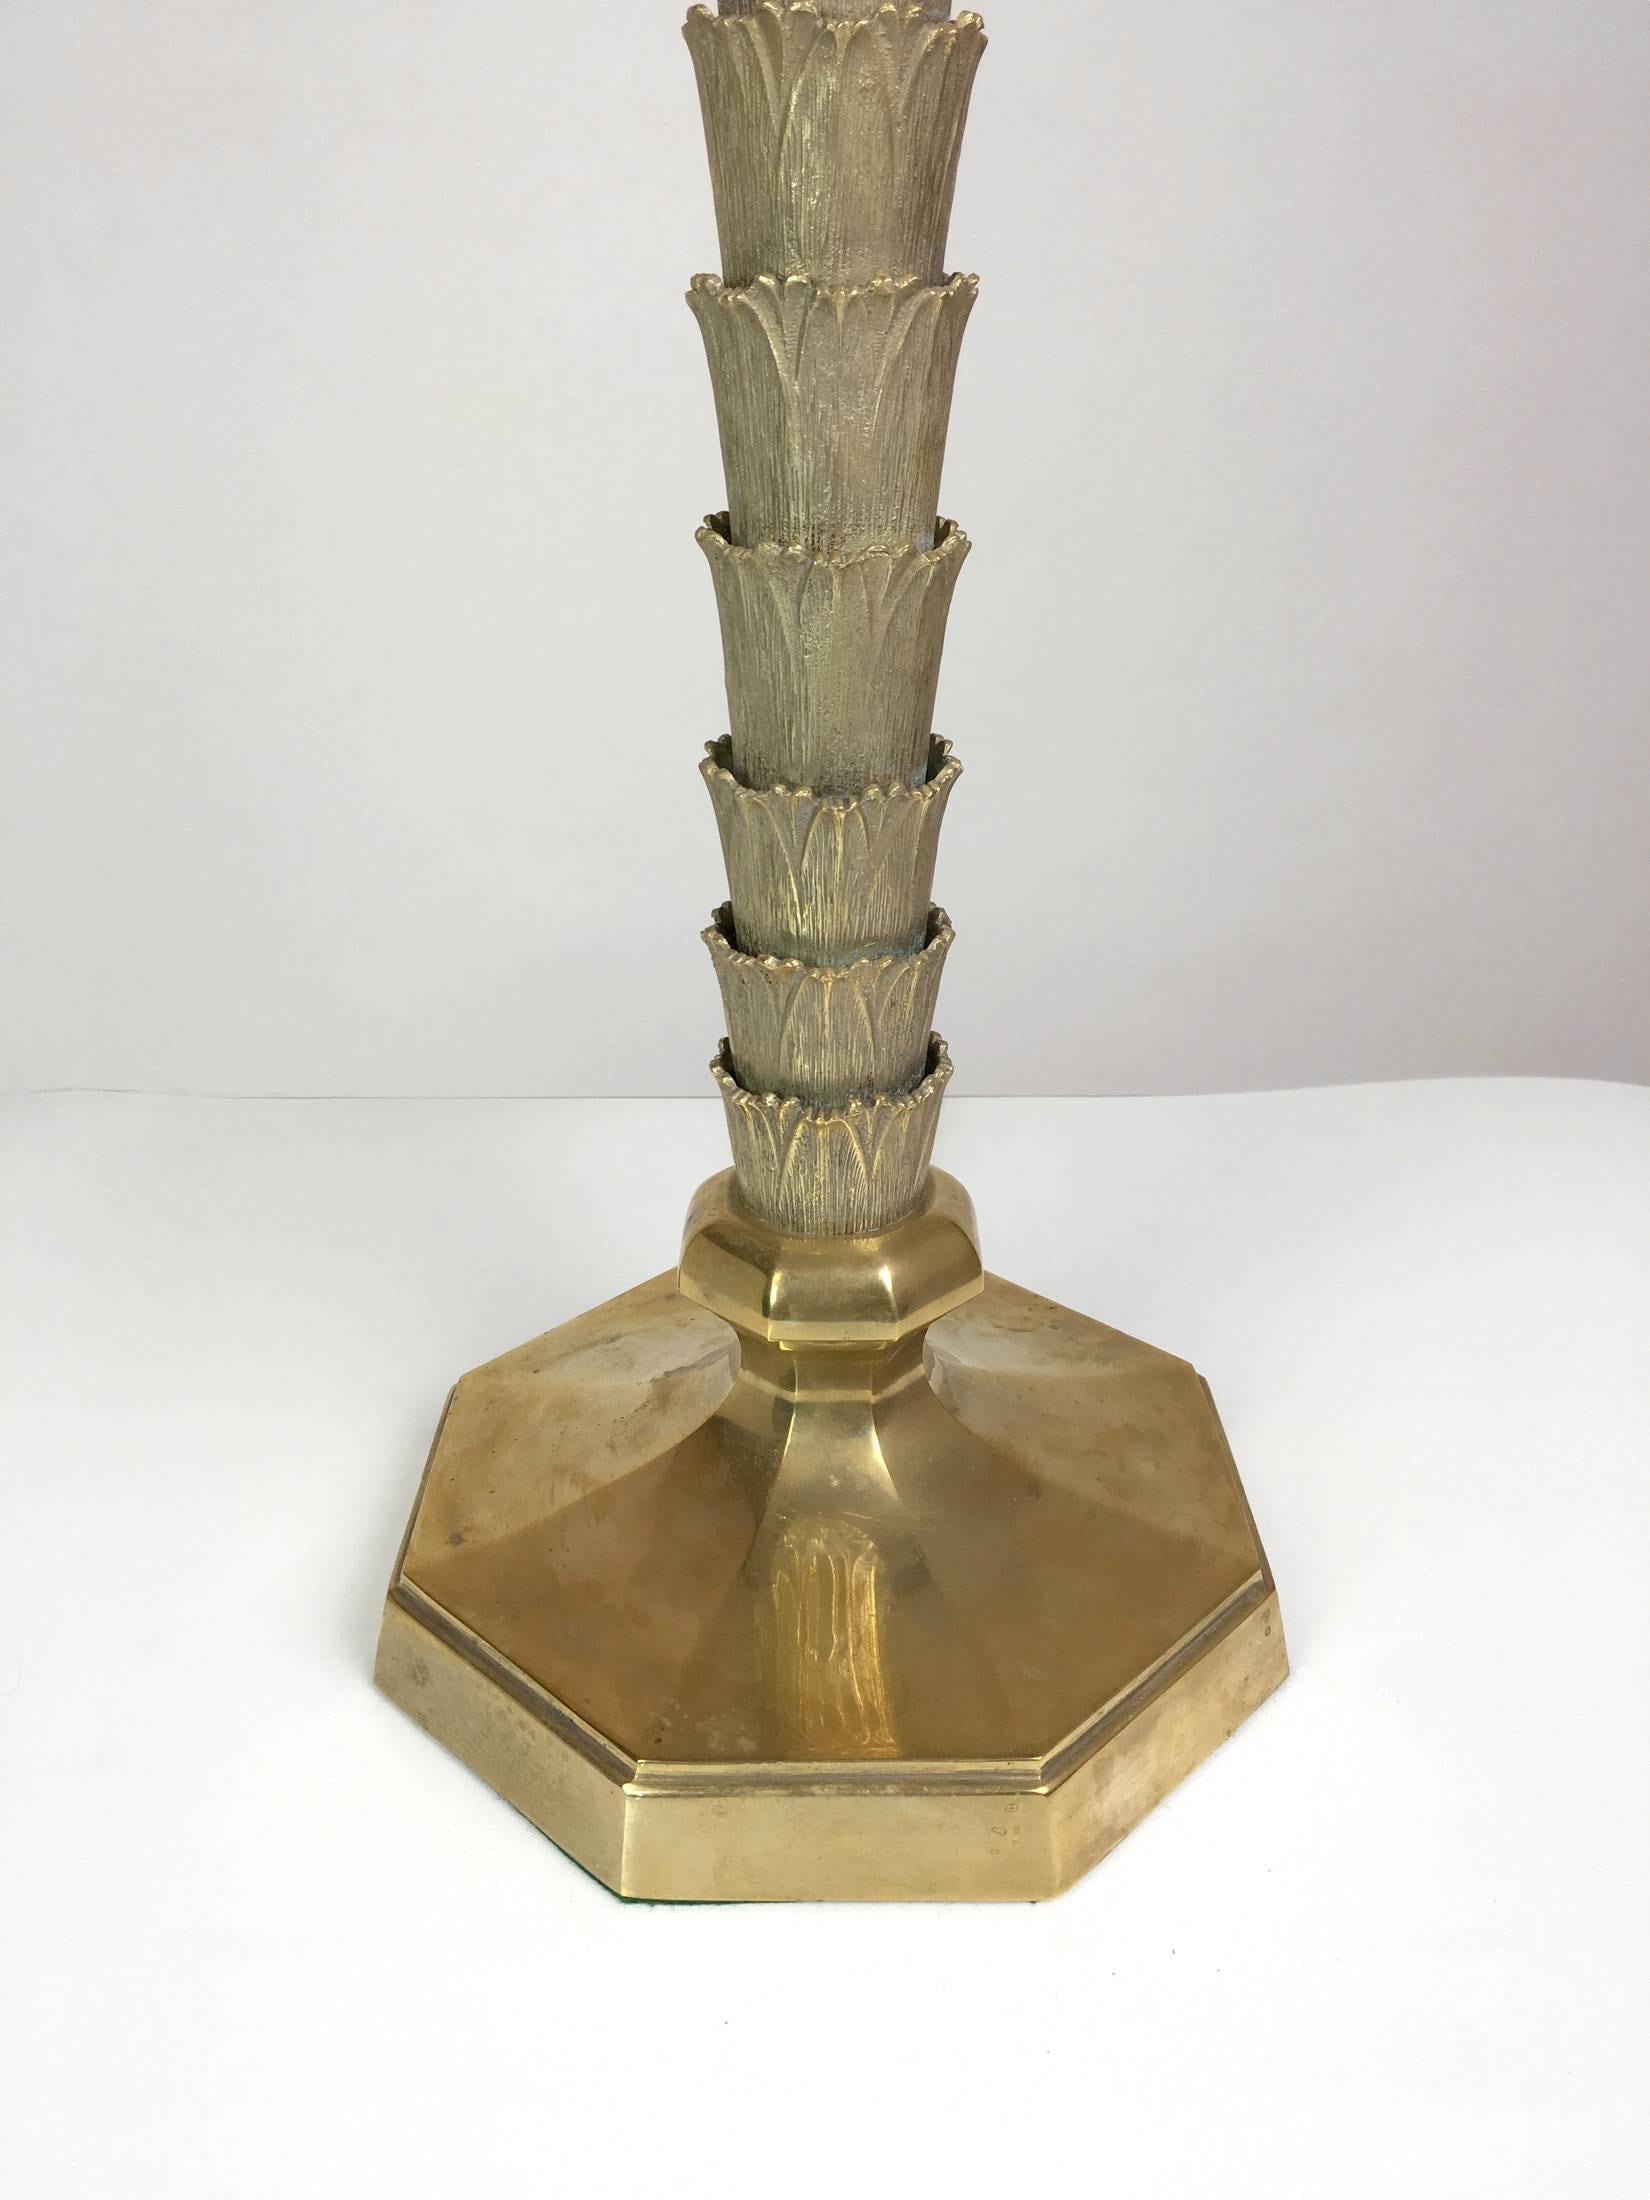 A stylish bronze palm tree trunk lamp. The bronze fluted tiered trunk on an octagonal base. Substantial and well made. Newly retired with new double sockets. Measures: Height to top of trunk, 20". Shade for display only.